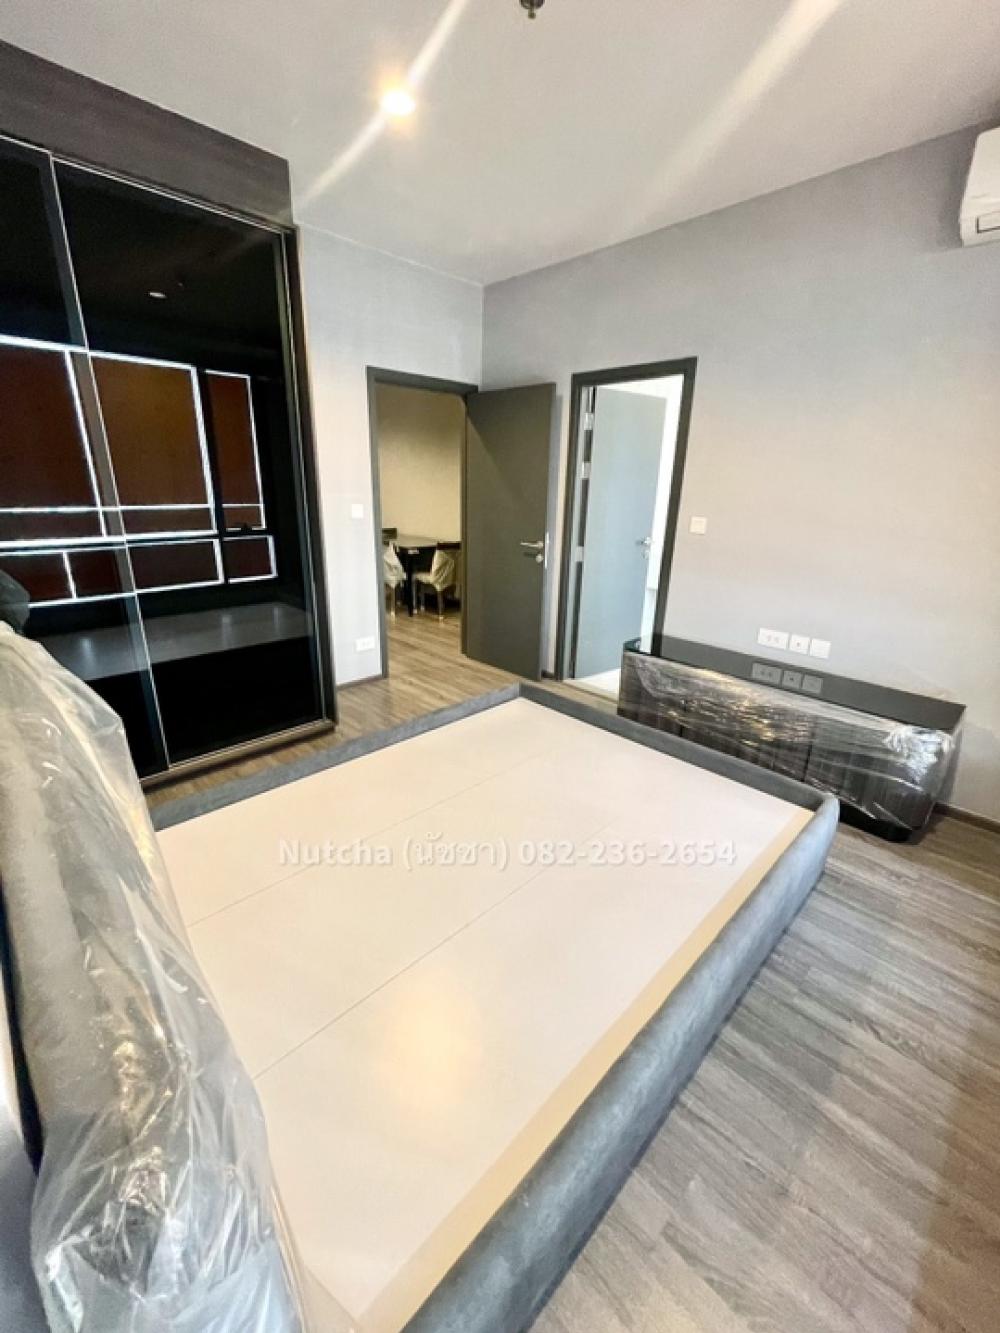 For SaleCondoRatchathewi,Phayathai : 🔥 Leaked room!!! 🔥 Luxury condo, Ideo Mobi Rangnam, near BTS Monument, 2Bed2Baht, free, fully furnished, ready to move in. Contact project salesman 0822362654 Natcha